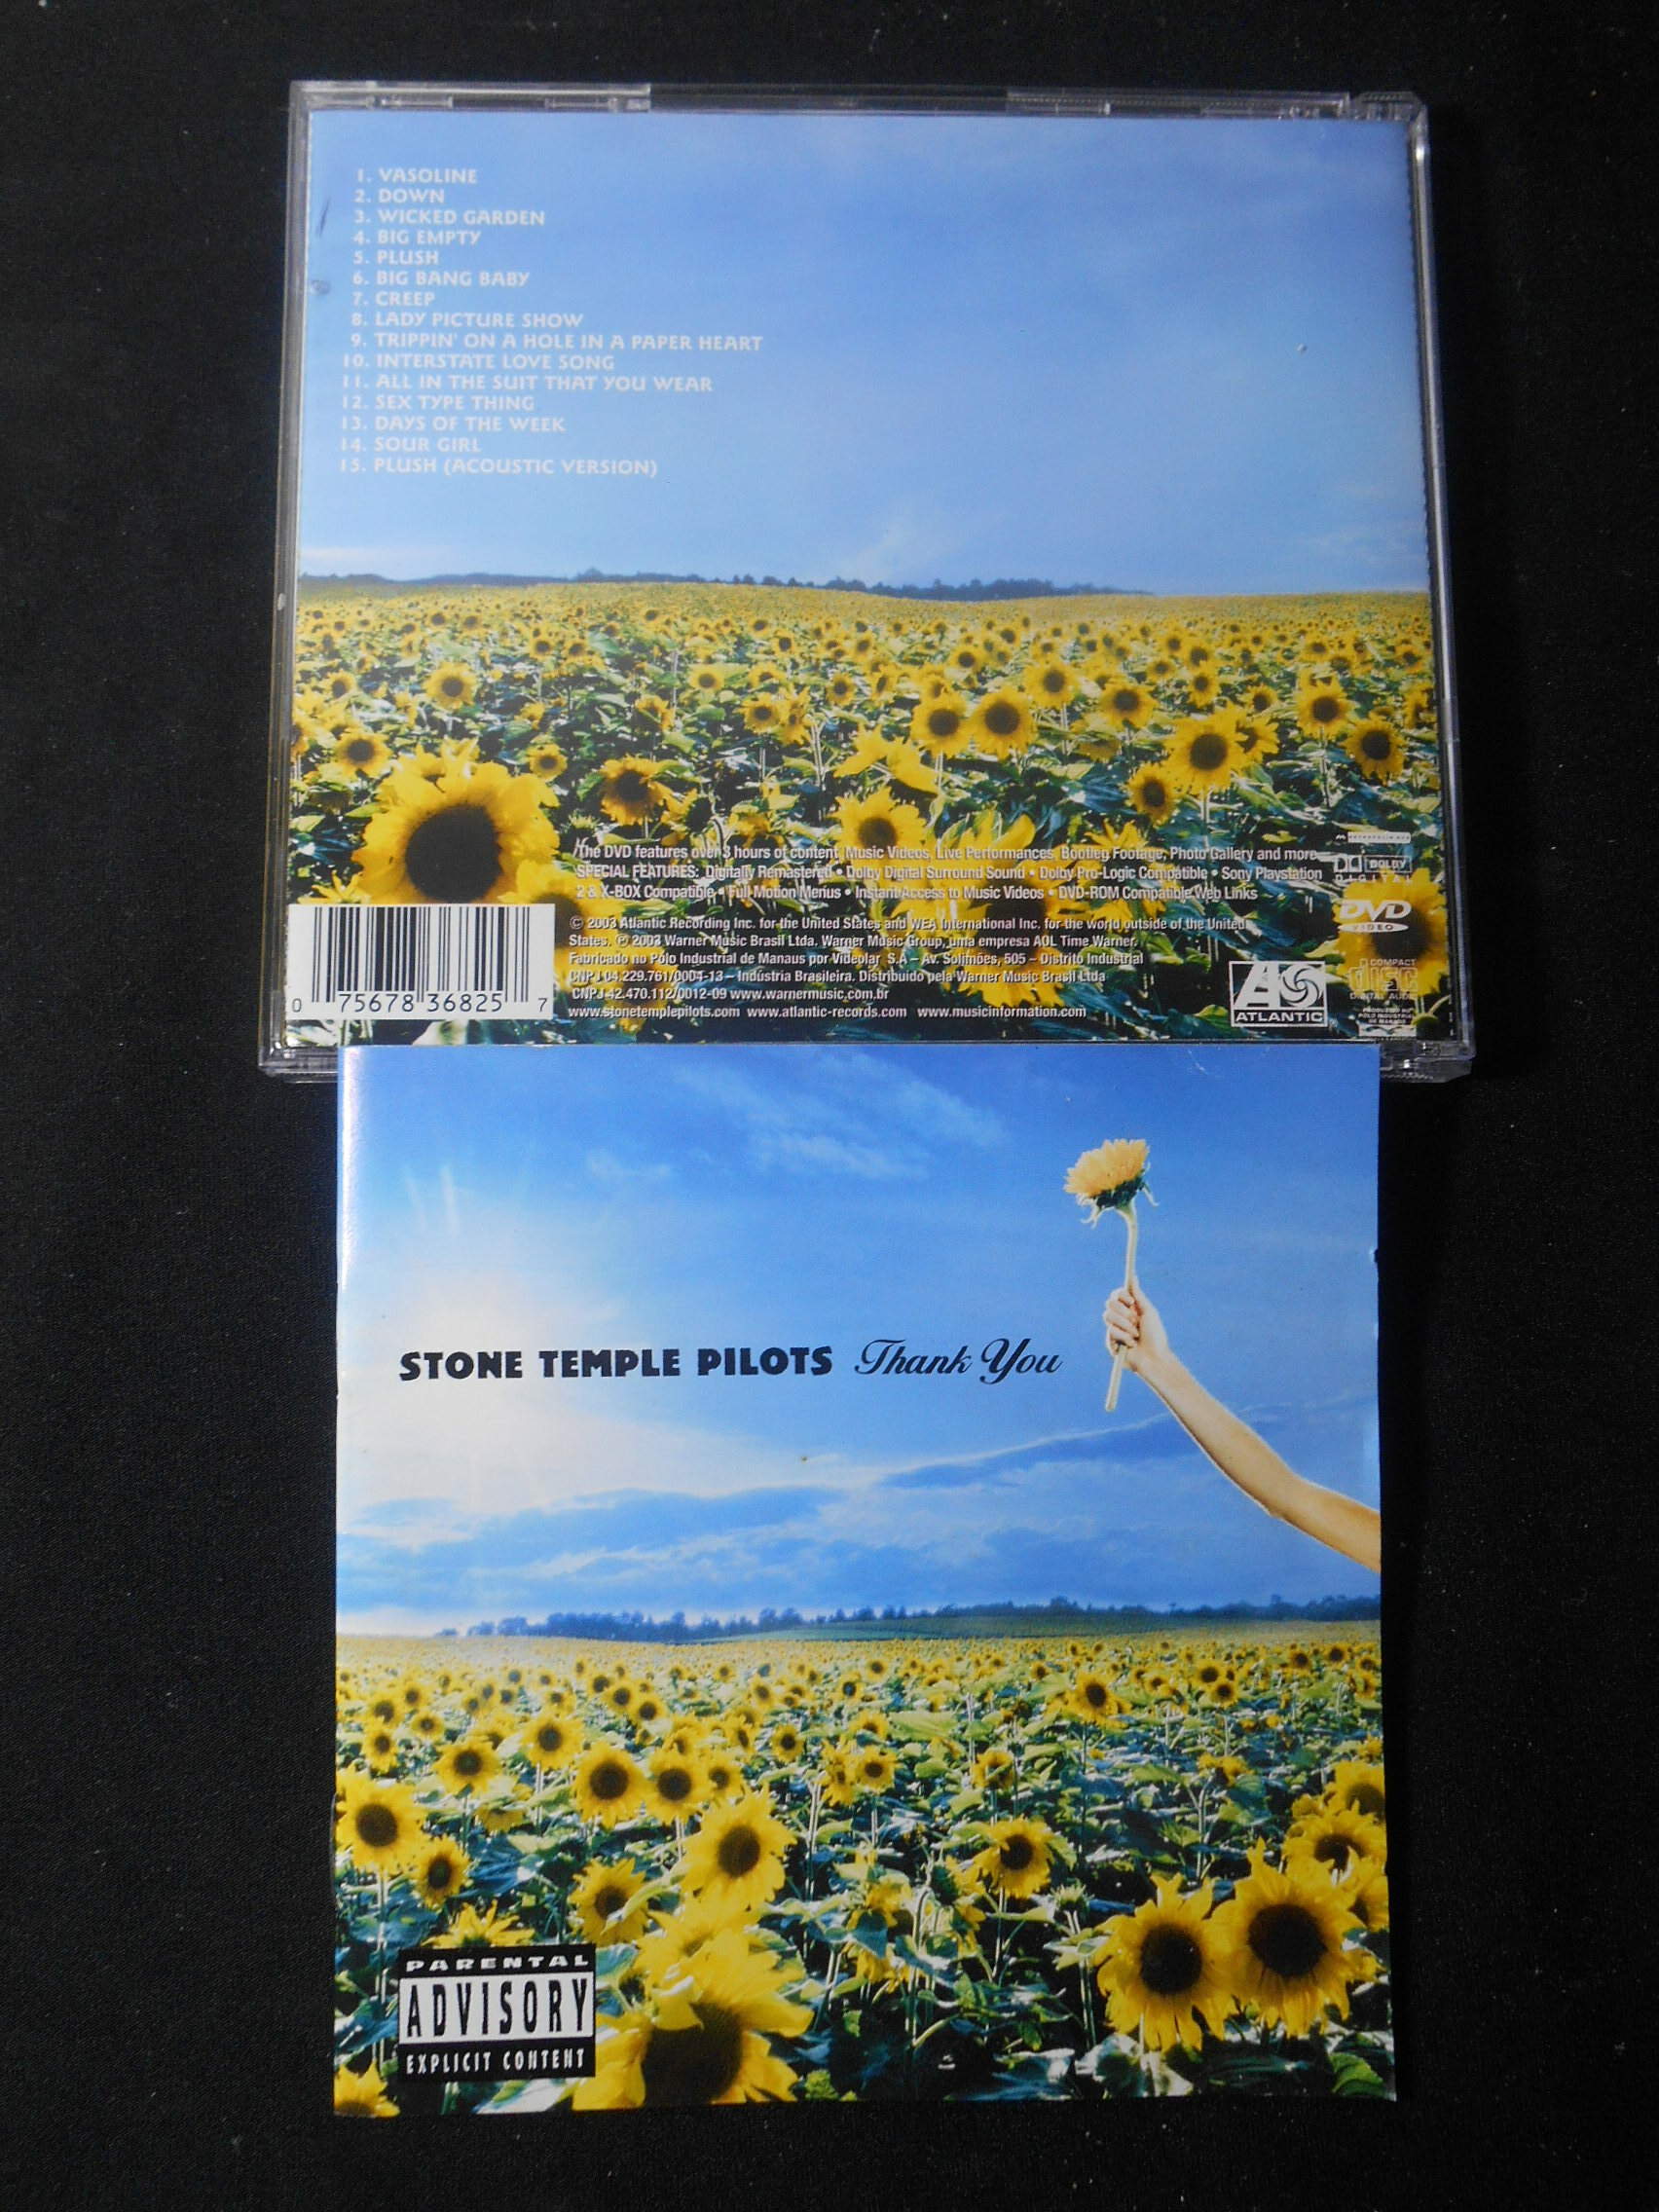 CD - Stone Temple Pilots - Thank You (CD/DVD)